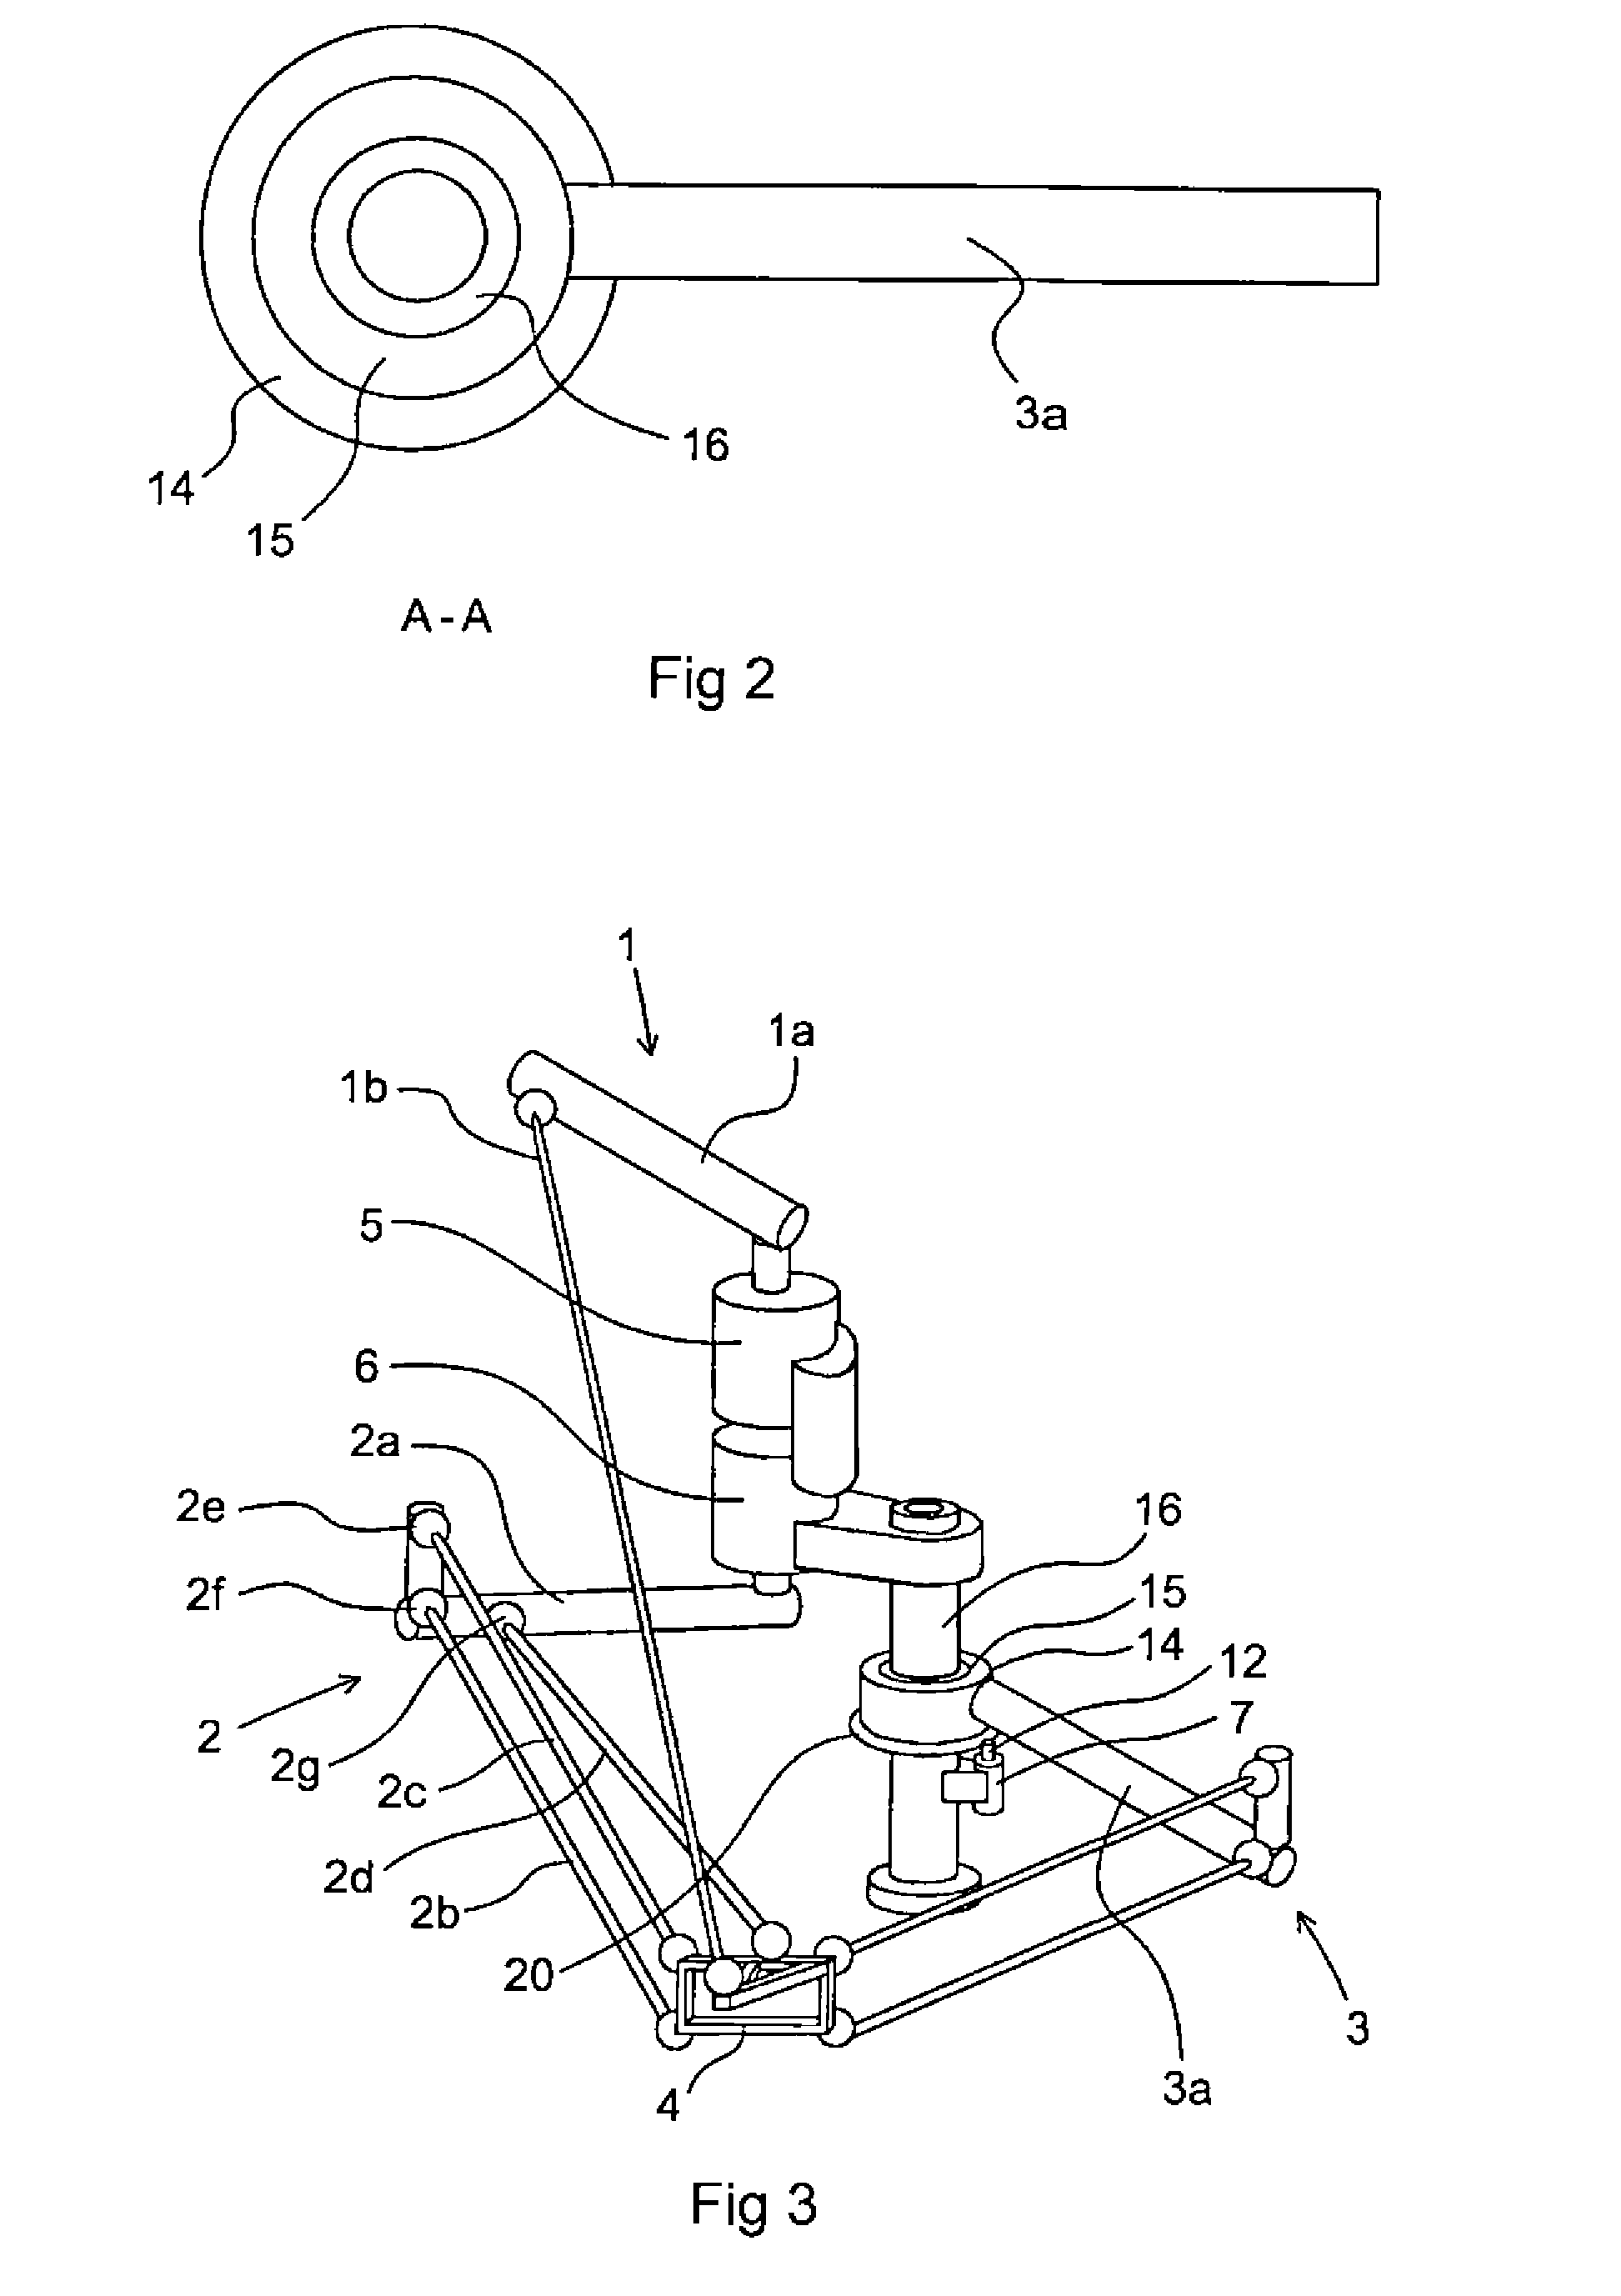 Industrial Robot Including A Parallel Kinematic Manipulator